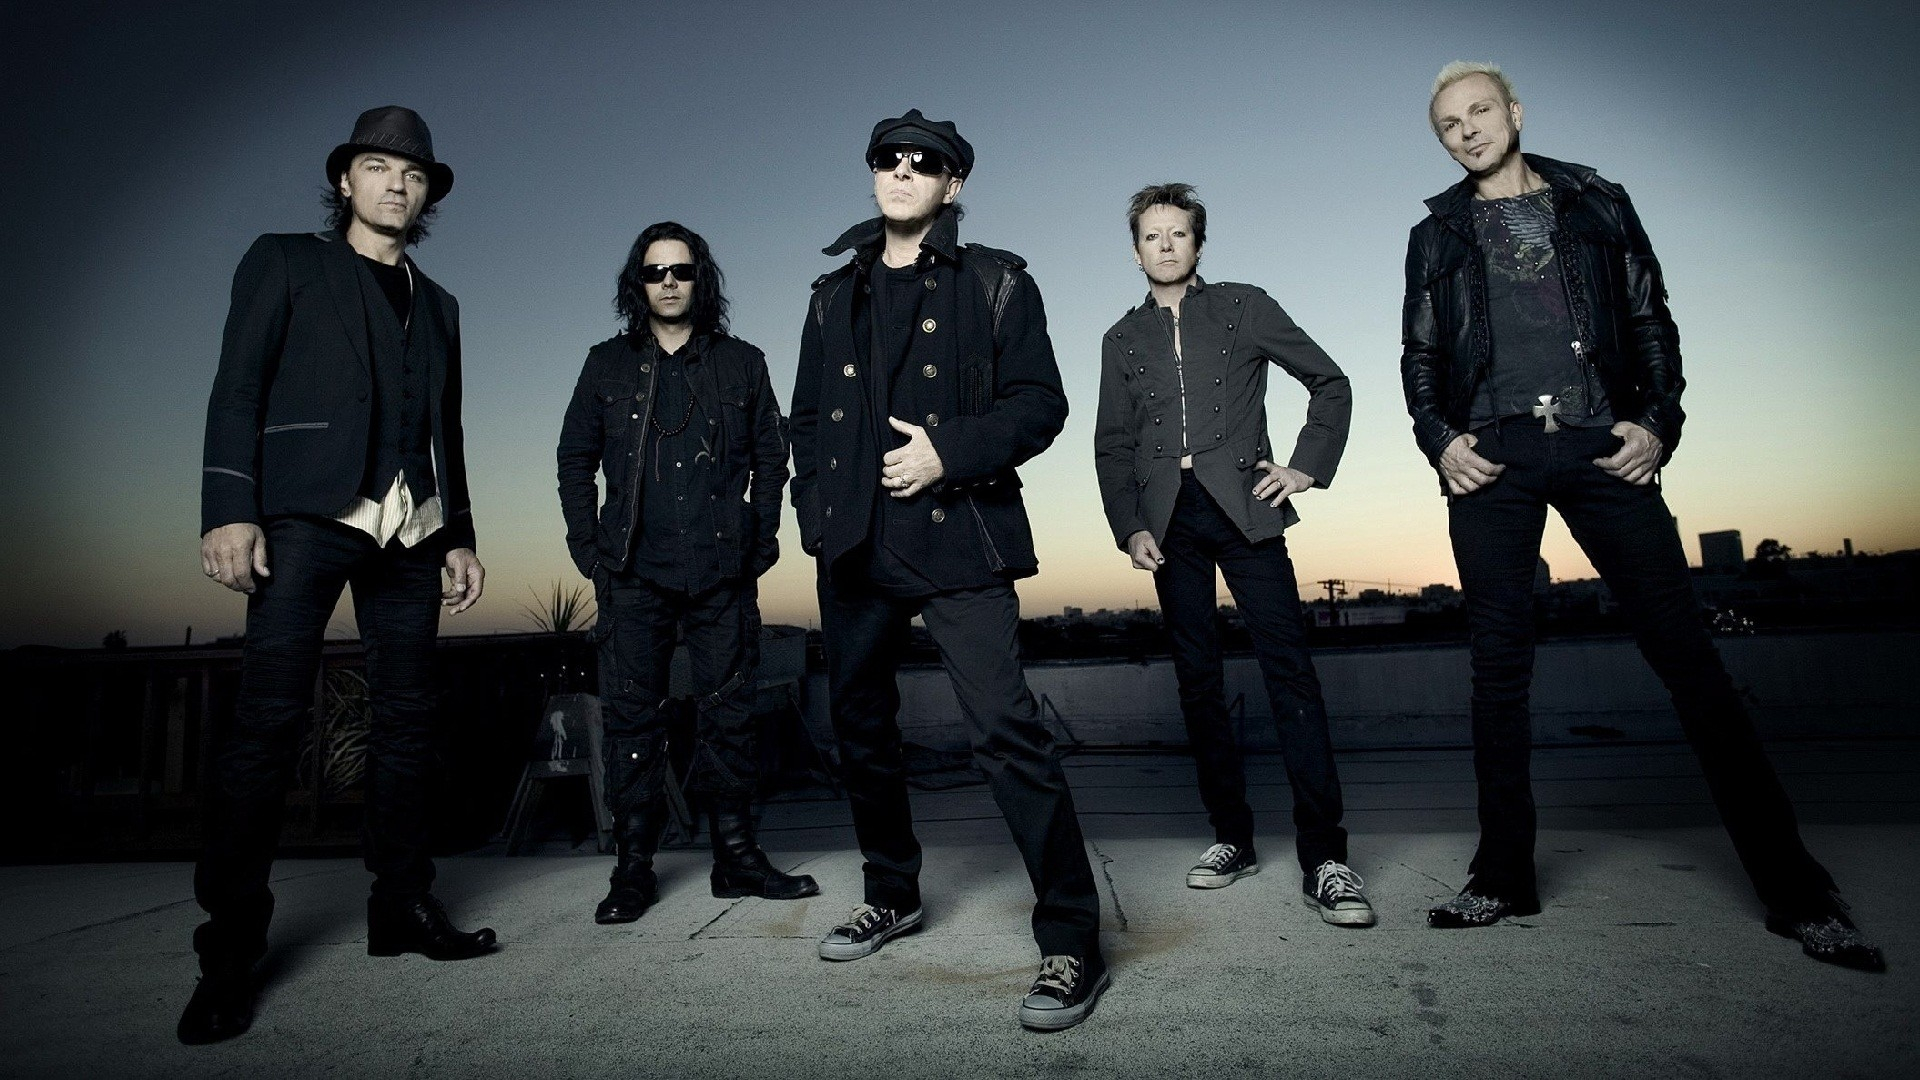 1920x1080 10+ Scorpions HD Wallpapers and Backgrounds